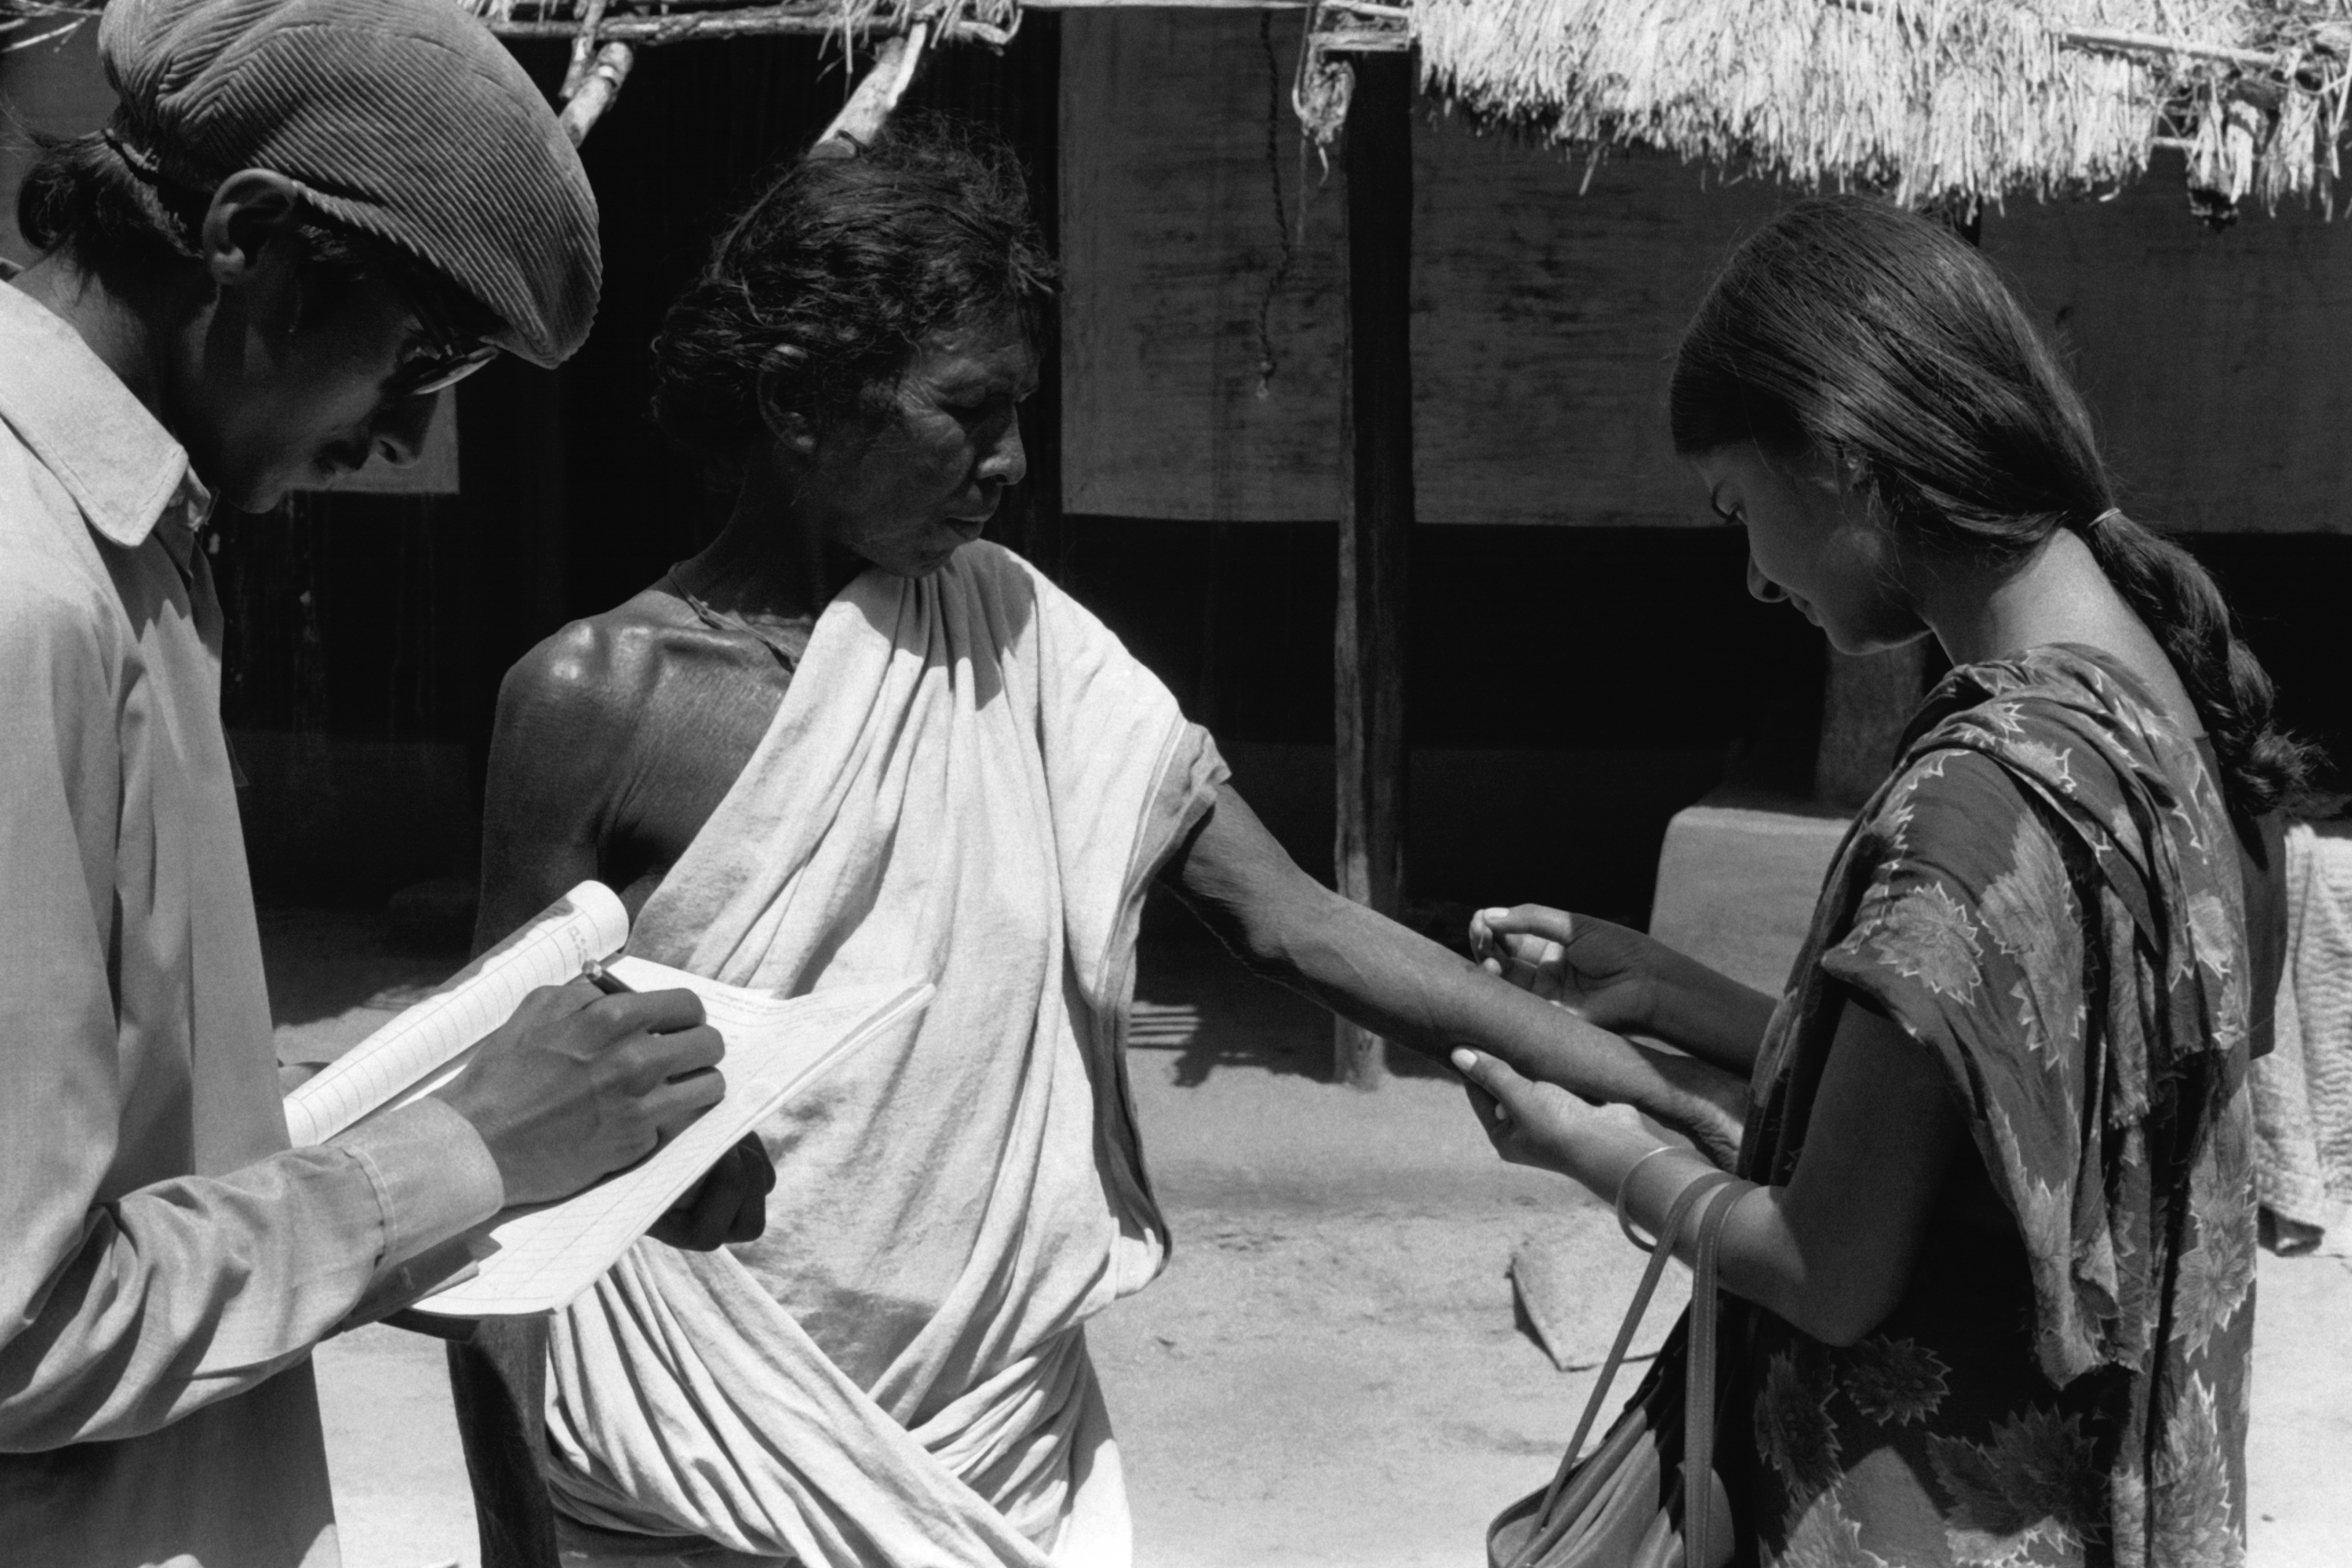 This black-and-white photograph from 1974 shows a woman administering a smallpox vaccine with a bifurcated needle to a man standing outside his home in Bihar, India. Standing beside them is another smallpox containment worker, likely recording the vaccination in a notebook.